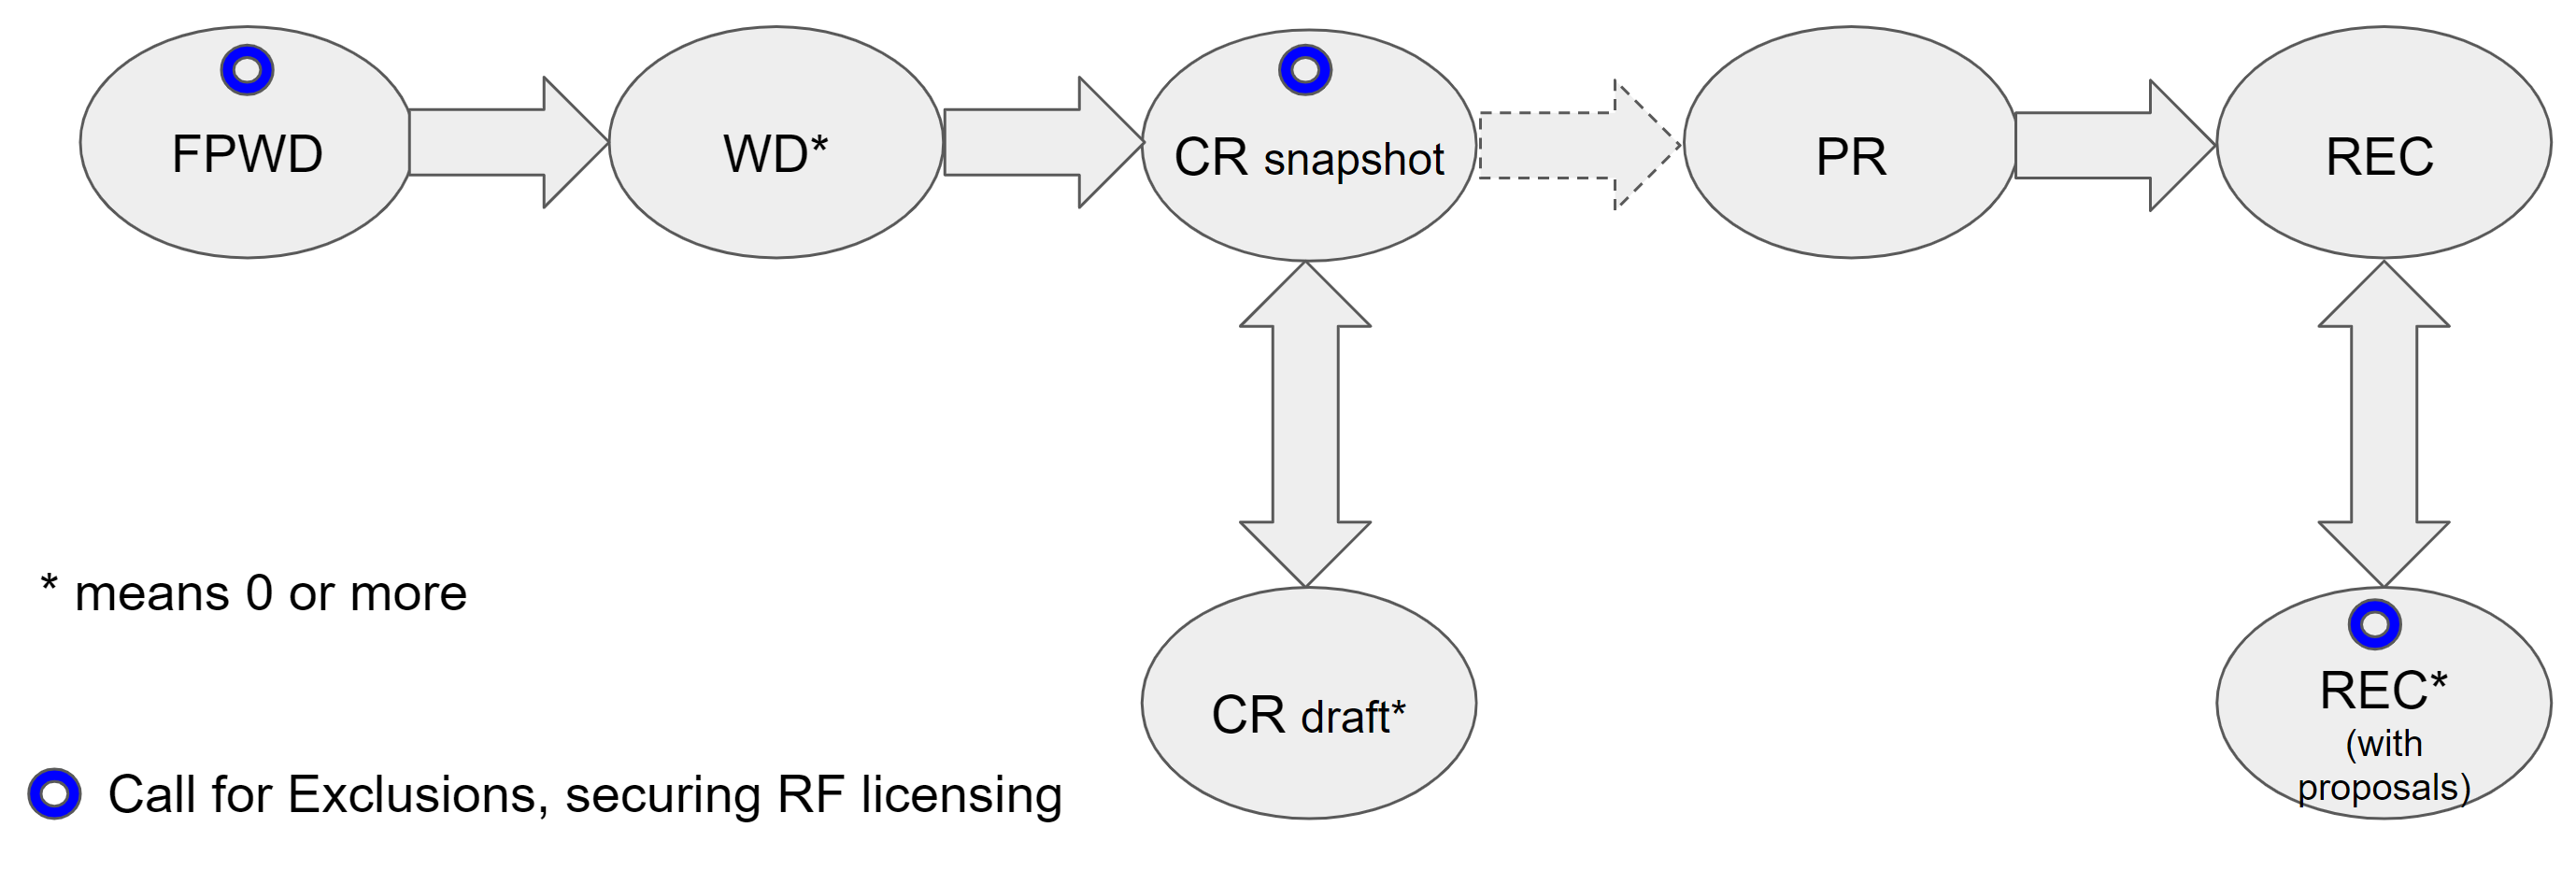 This graphic shows the Recommendation track of 2020. 5 circles from left to right for FPWD, WD, CR snapshot, PR, and REC. All of those are linked with arrows moving forward. One circle under CR snapshot to go back and forth with CR Draft. One circle below REC for Recommendations contains proposals. FPWD, CR snapshot and REC with proposals are subjected to Call for Exclusions.